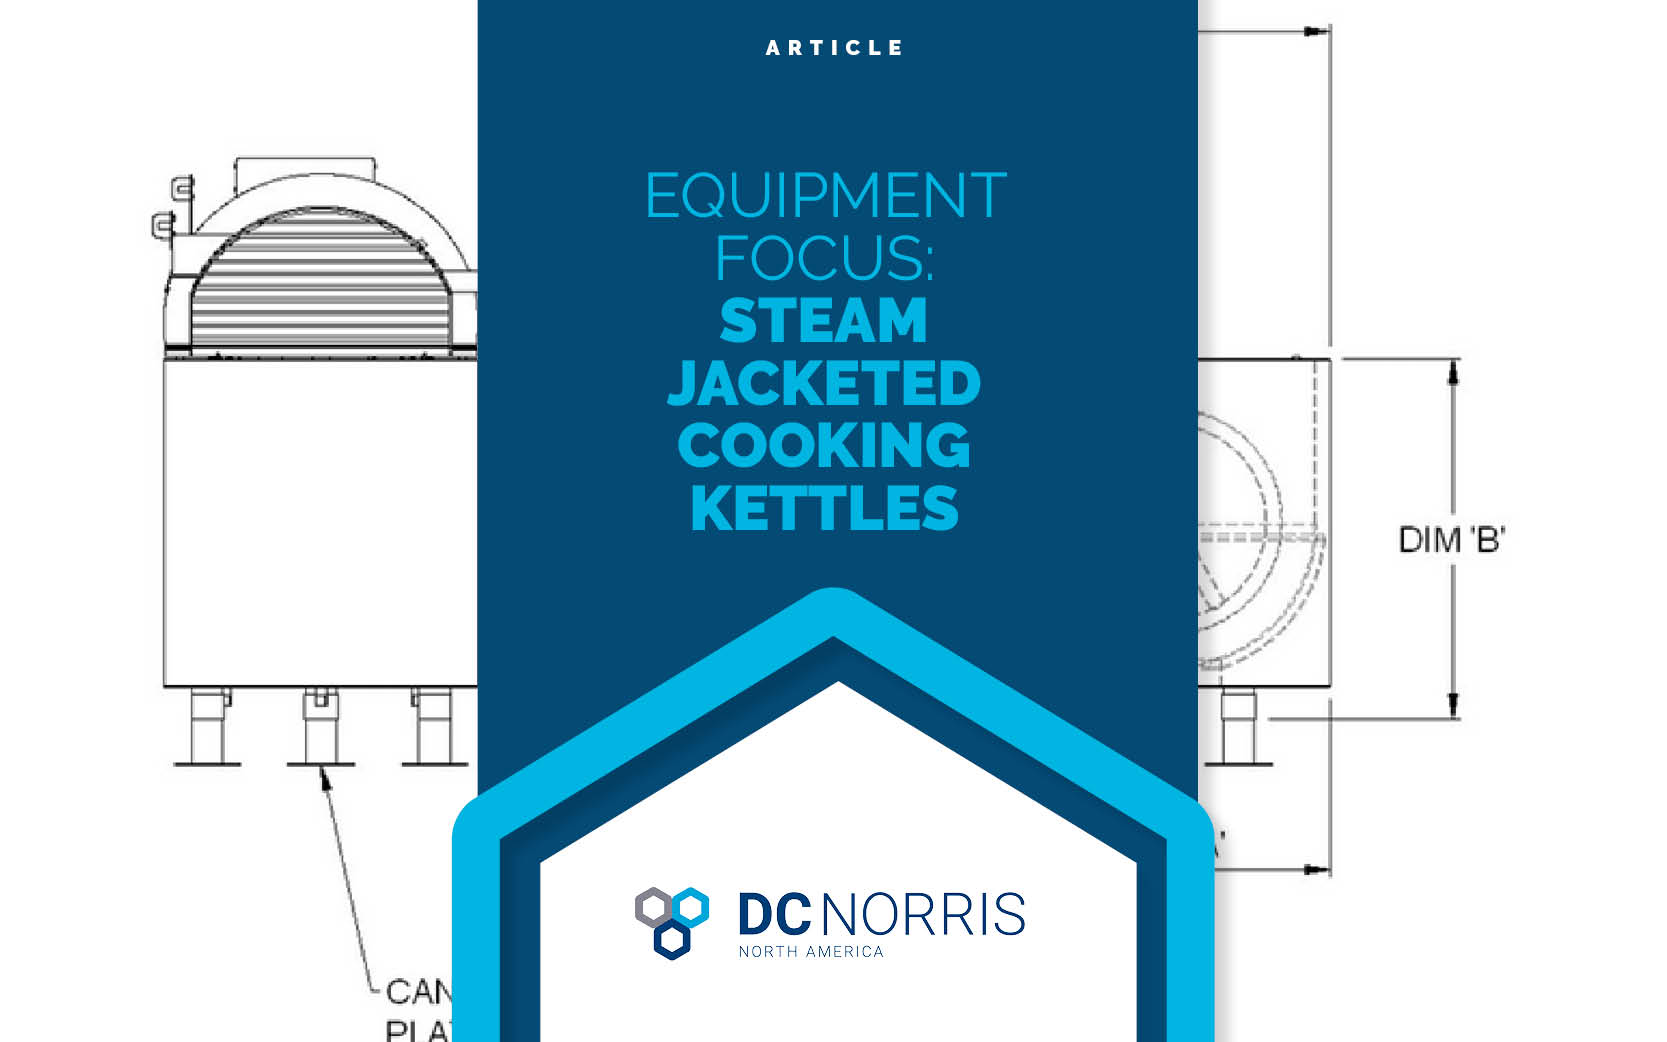 a large blue banner is in the middle of the image with a headline that reads 'Equipment Focus: Steam Jacketed Cooking Kettles